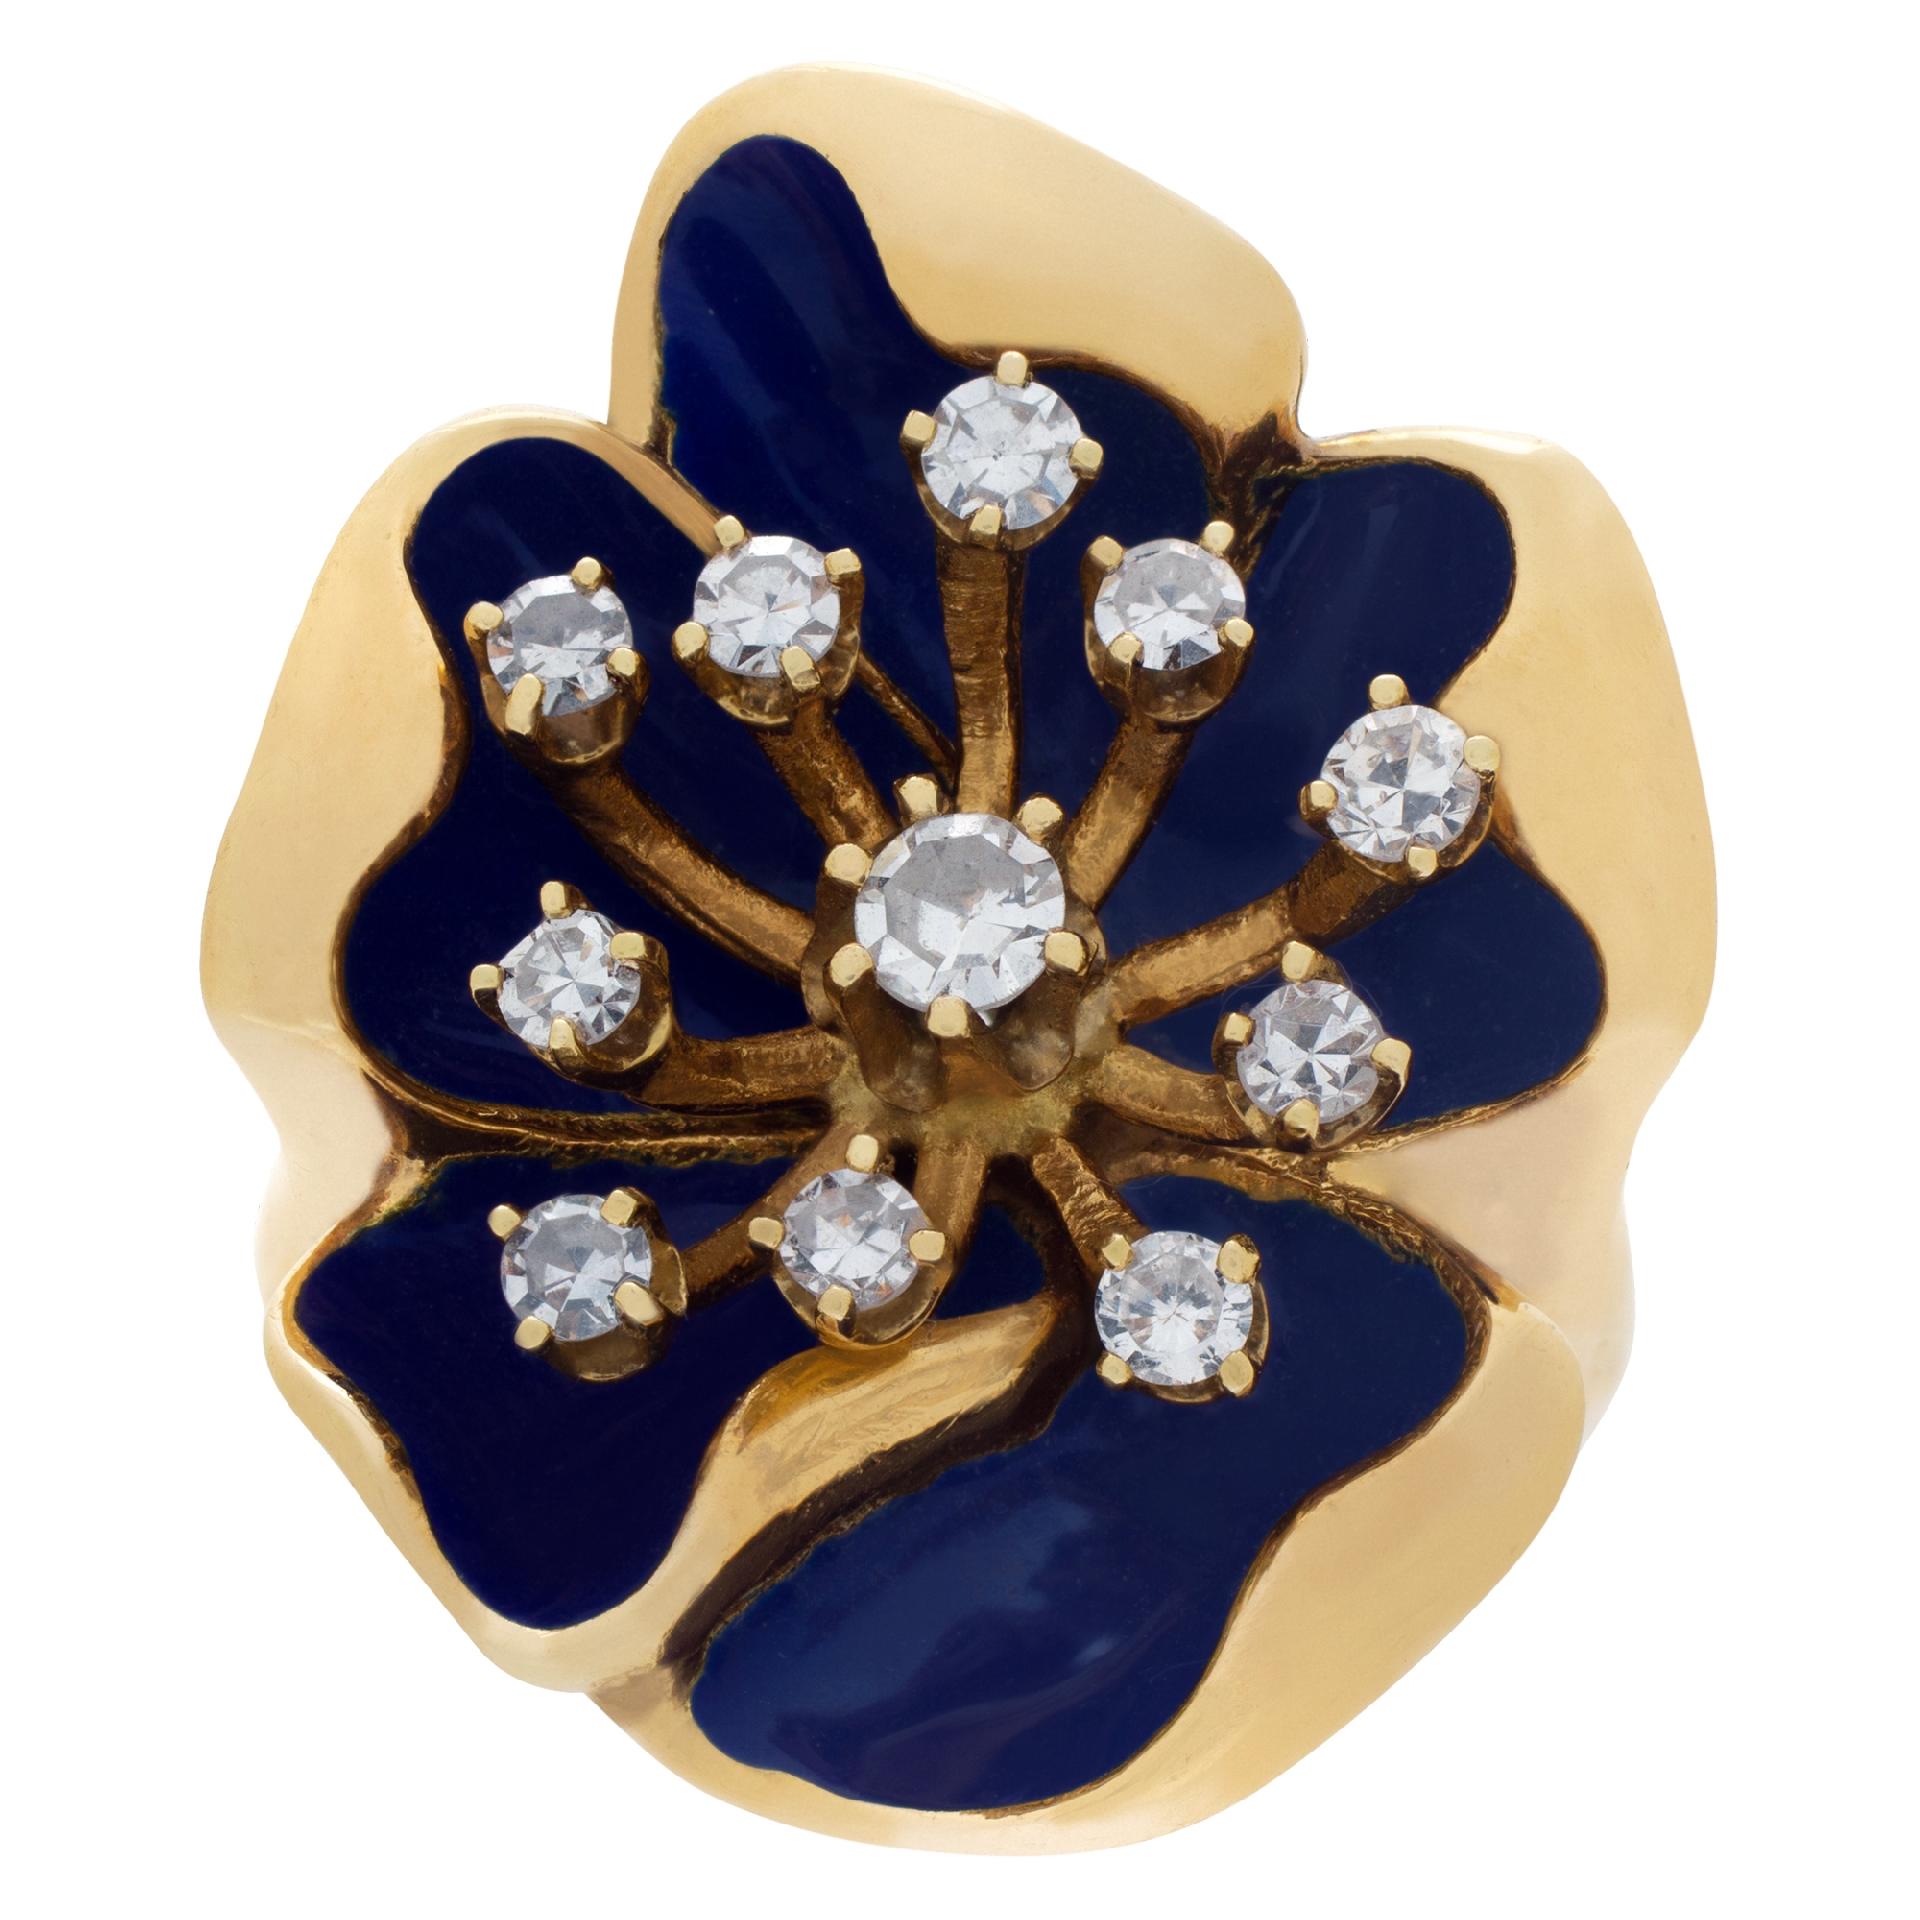 ESTIMATED RETAIL: $2,640.00   YOUR PRICE: $1,900.00
Flower shape ring with blue enamel and 0.30 carat in diamond accents in 14k. 
Ring is 0.95